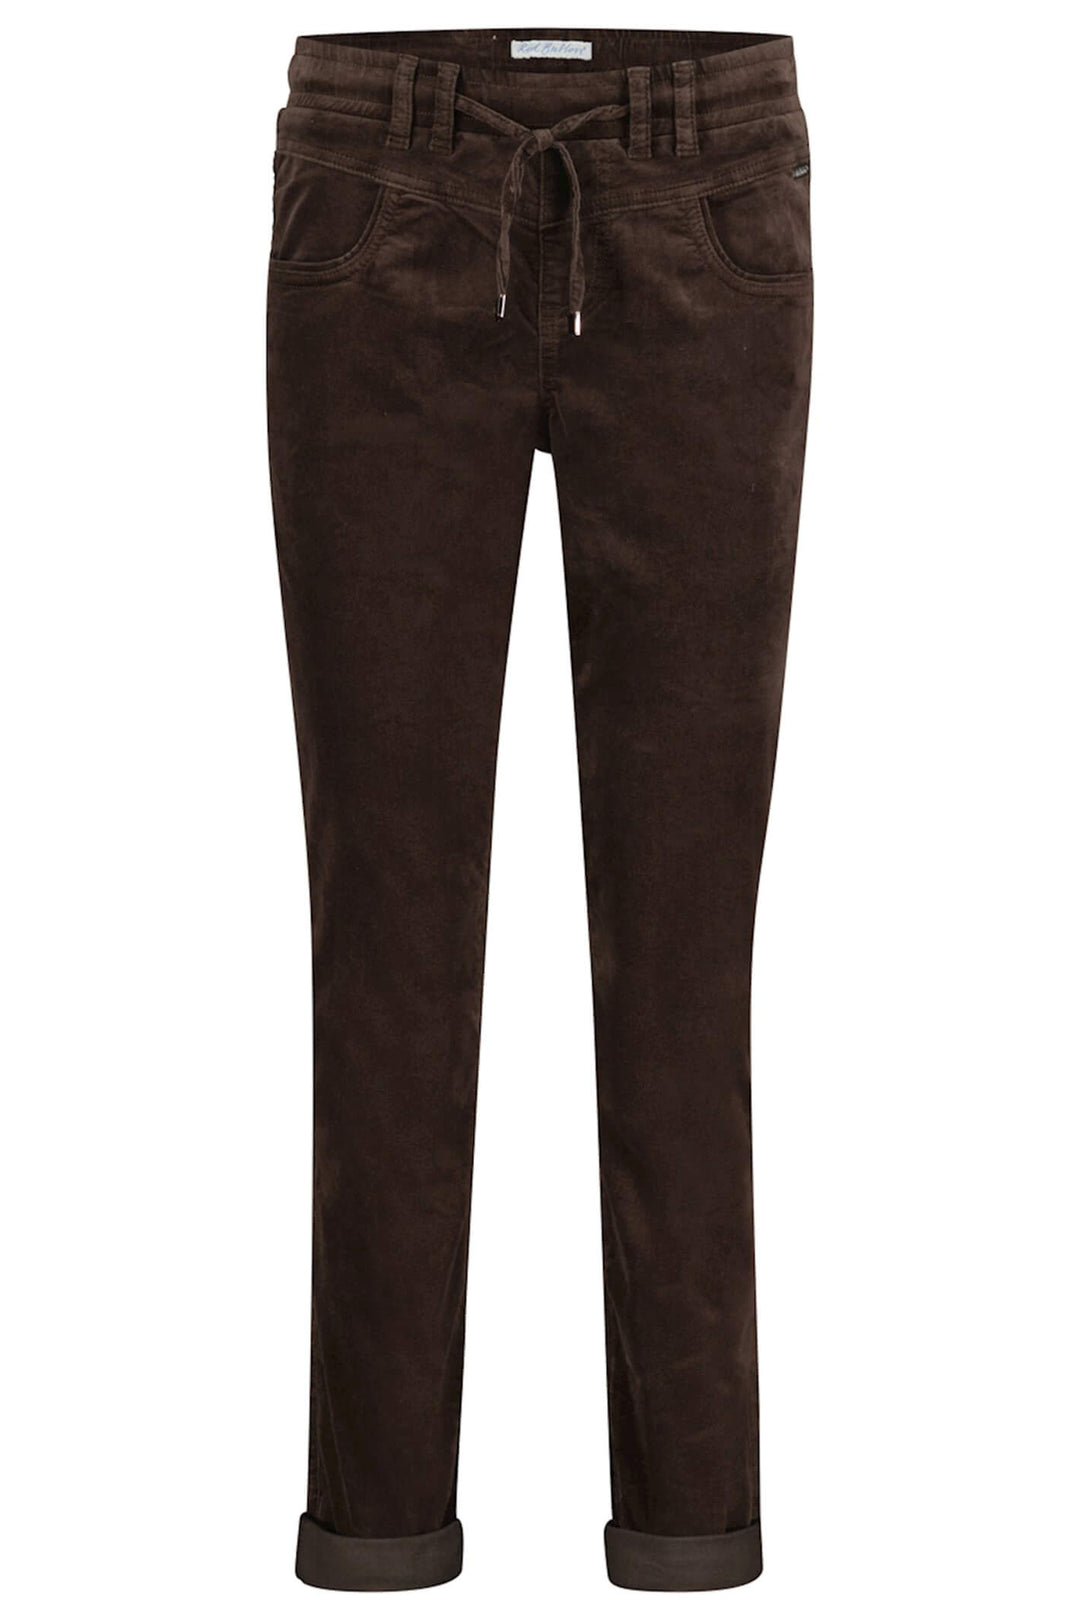 Red Button SRB4052 Tessy Espresso Brown Velvet Pull-On Trousers - Olivia Grace Fashion